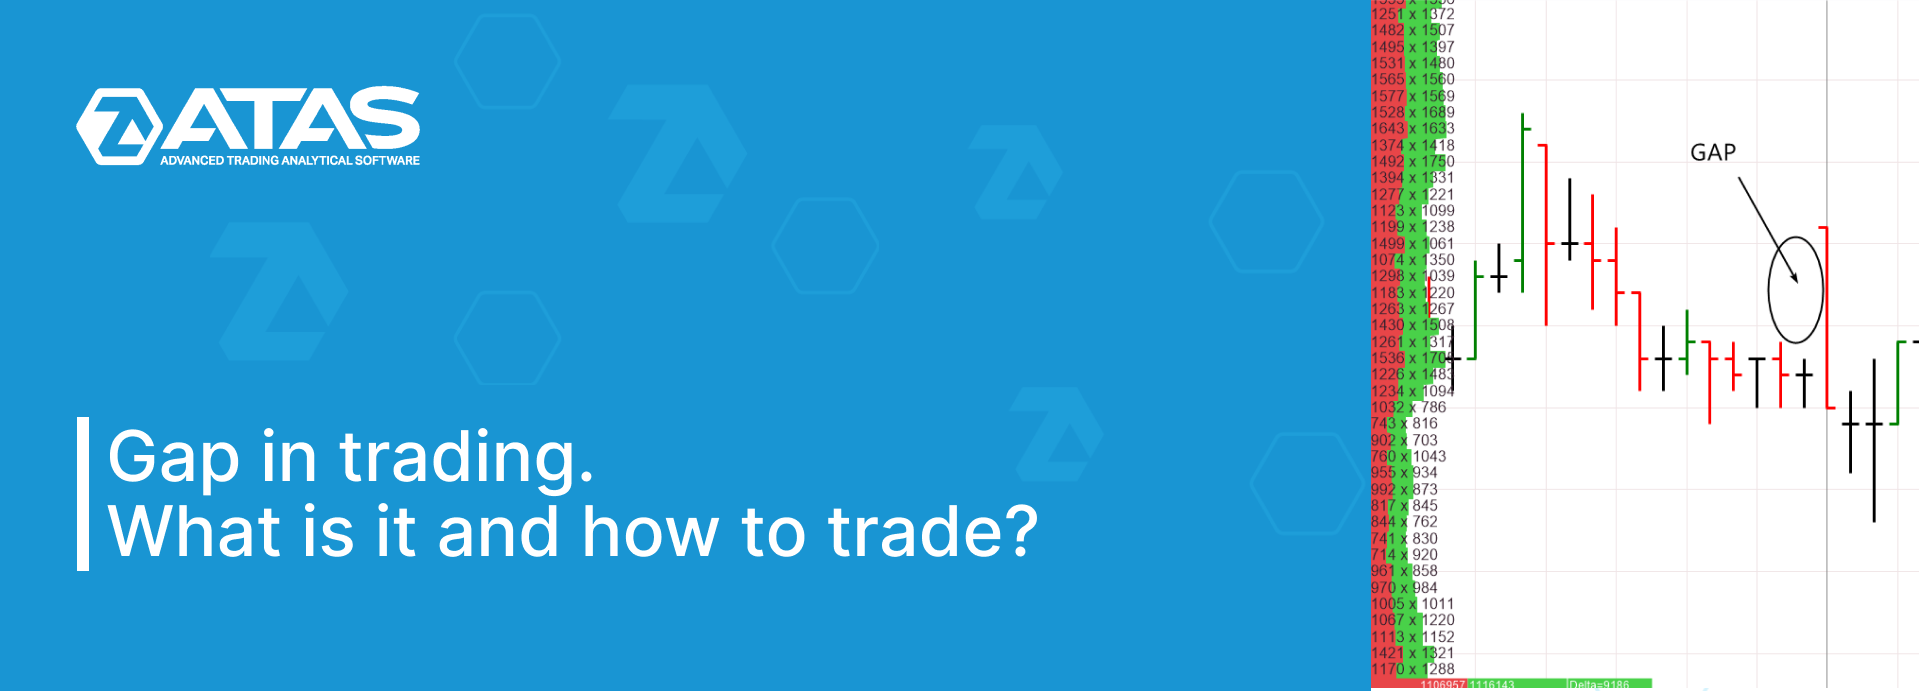 Gap in trading. What is it and how to trade?